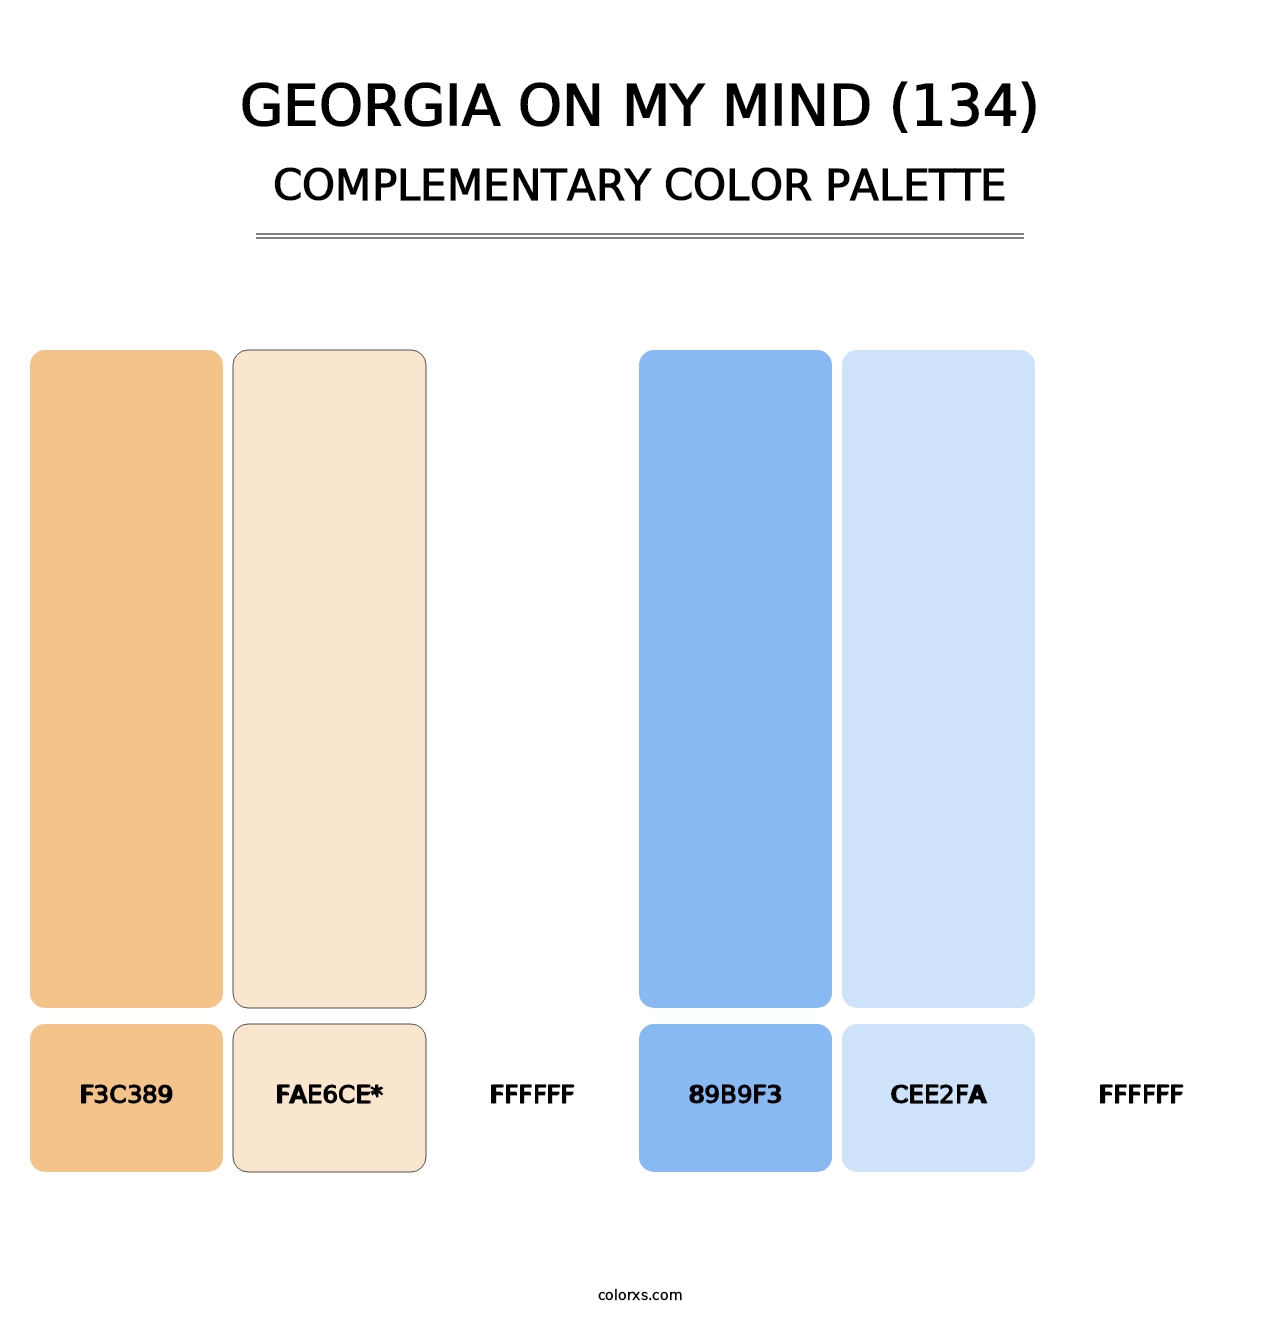 Georgia On My Mind (134) - Complementary Color Palette